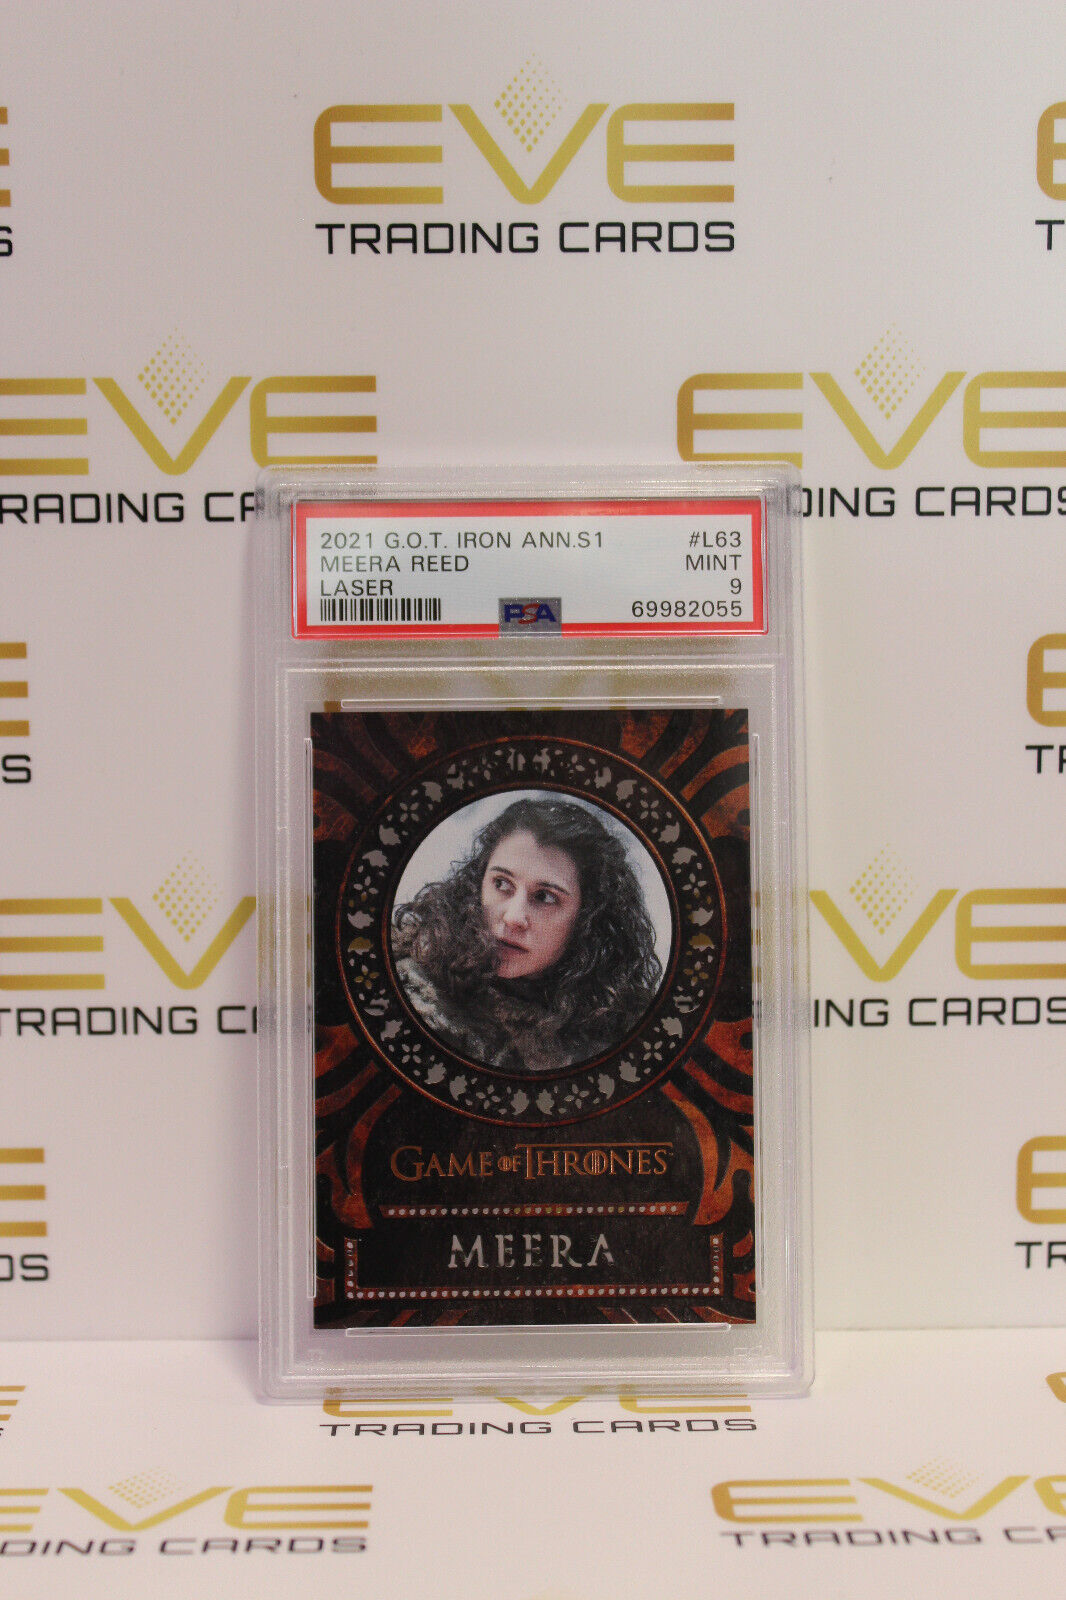 Graded Game of Thrones Card - L63 2021 Meera Reed Laser - PSA 9